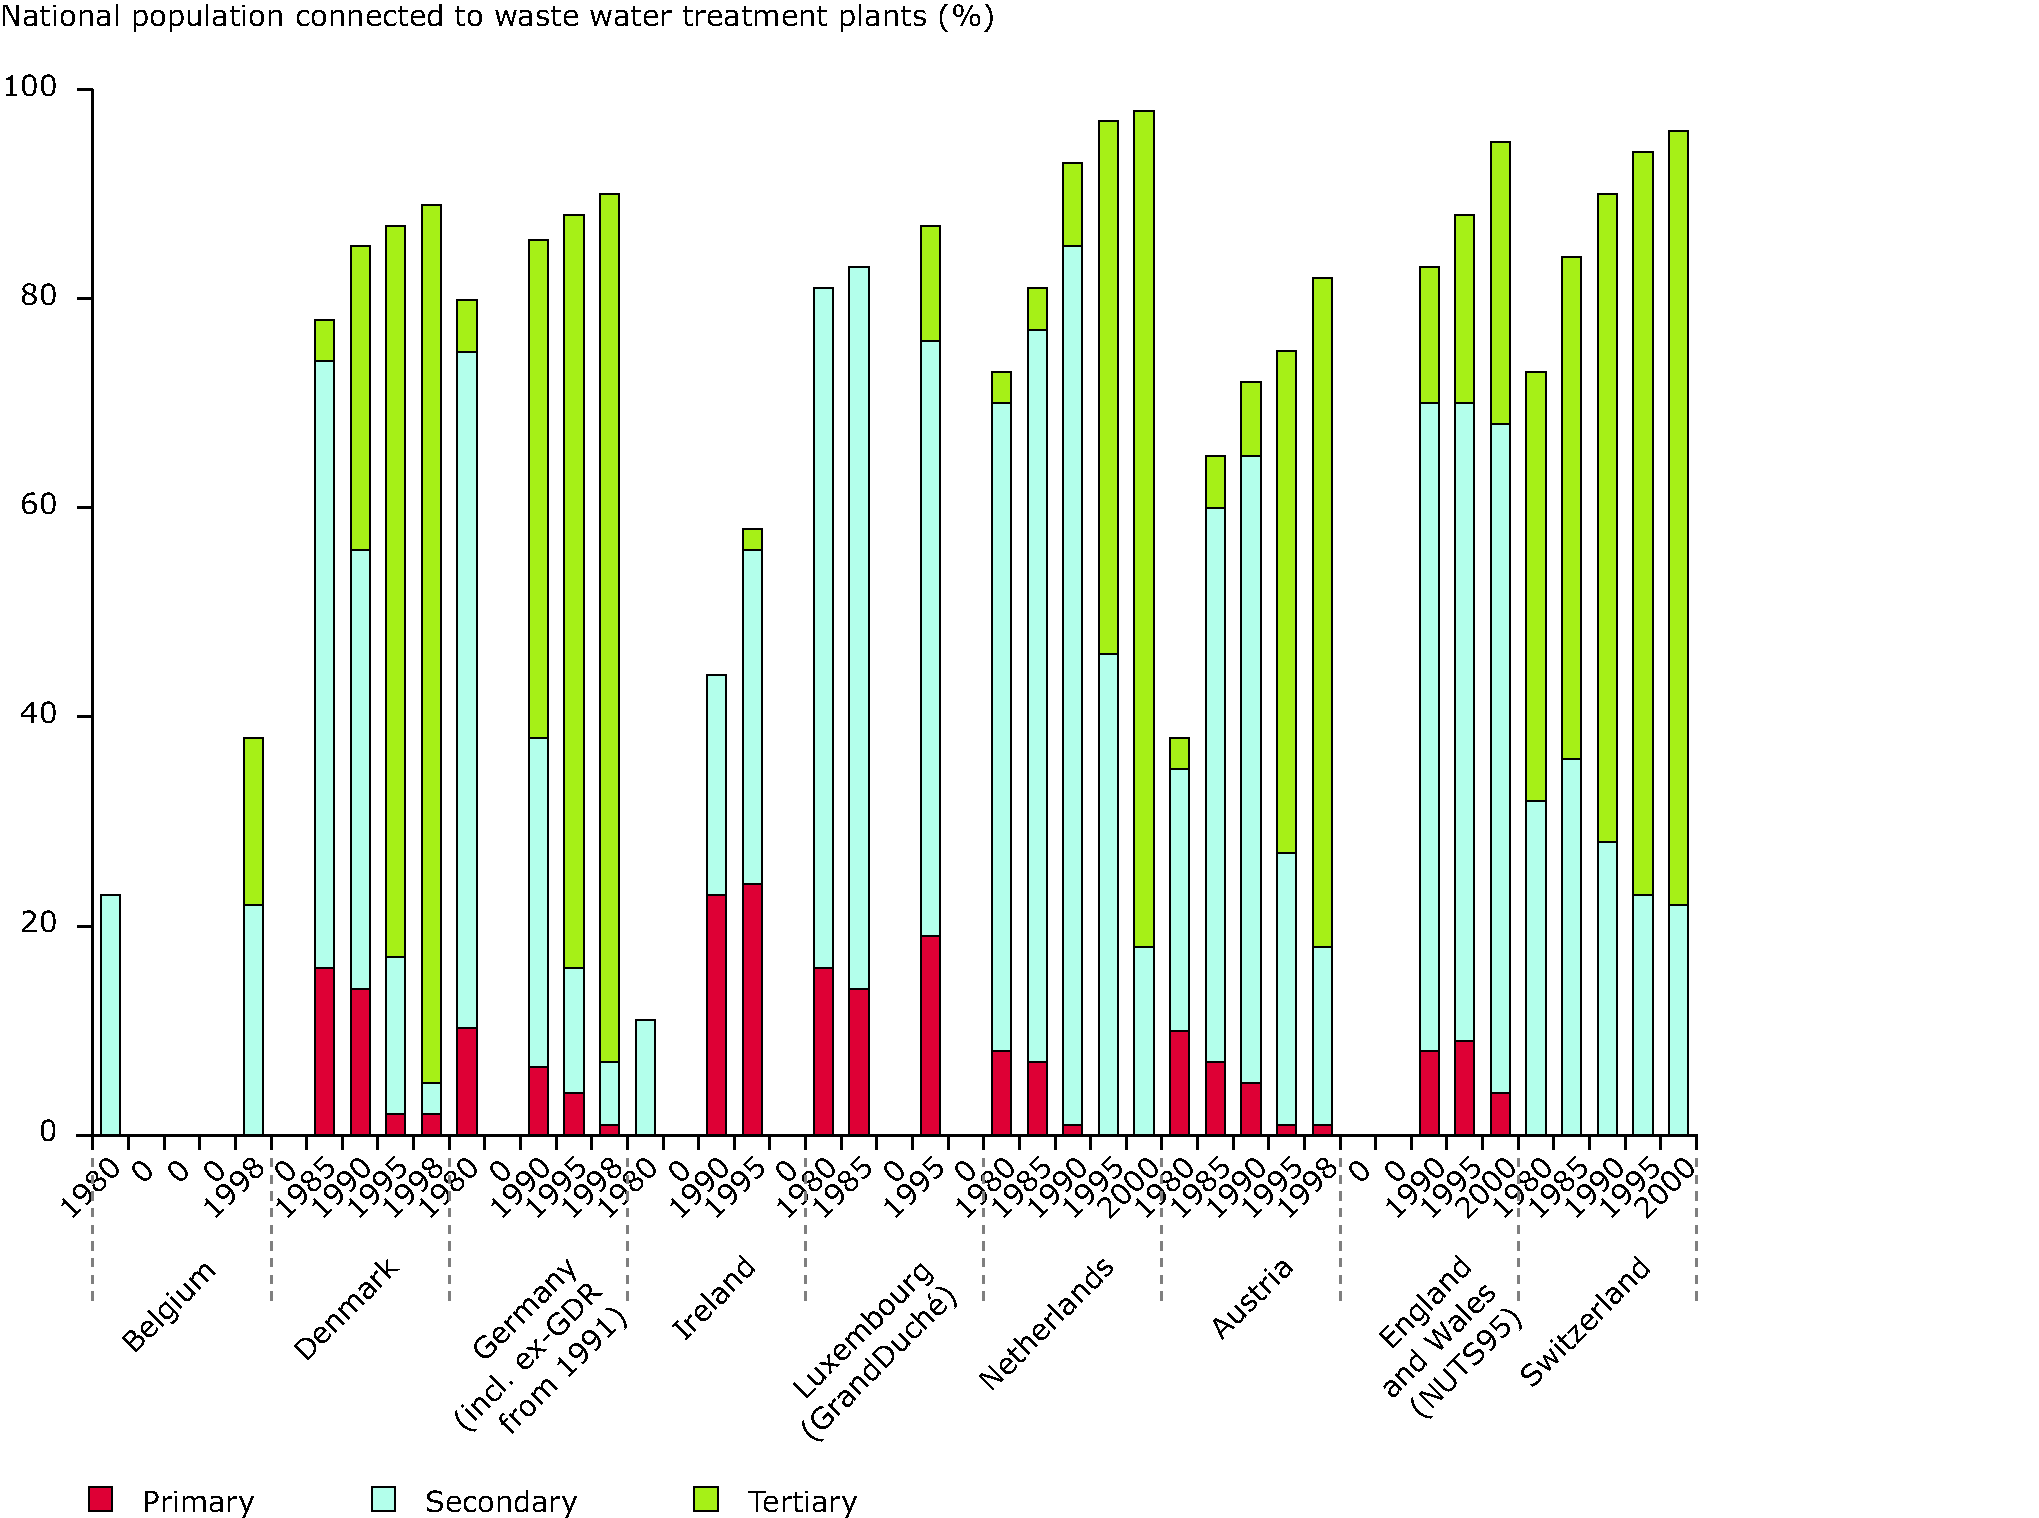 Changes in wastewater treatment in countries of Europe between 1980s and late 1990s (Western)